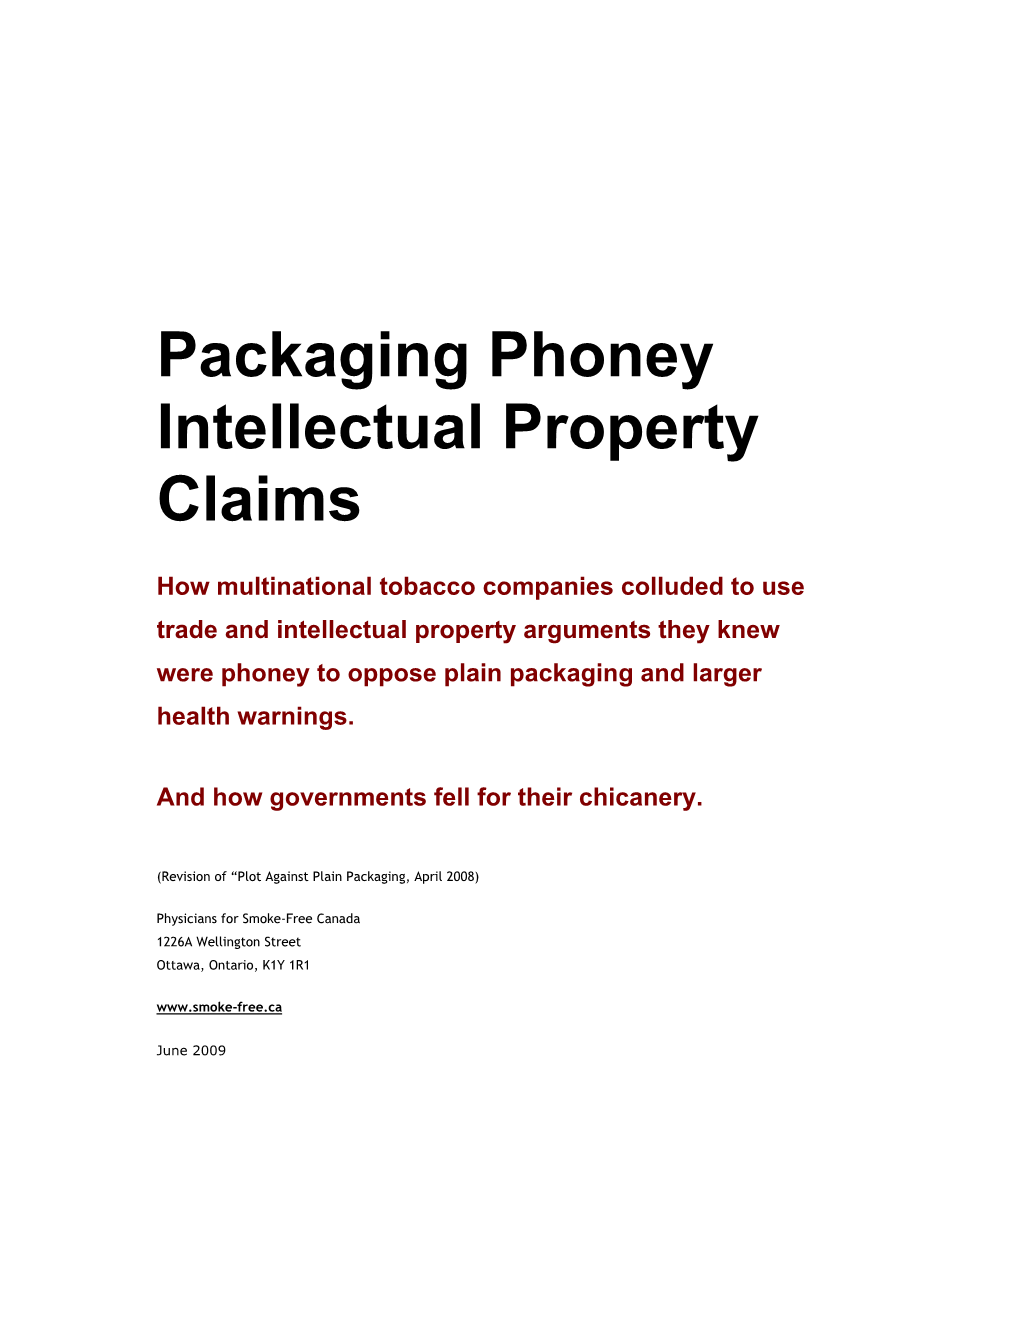 Packaging Phoney Intellectual Property Claims (2009)